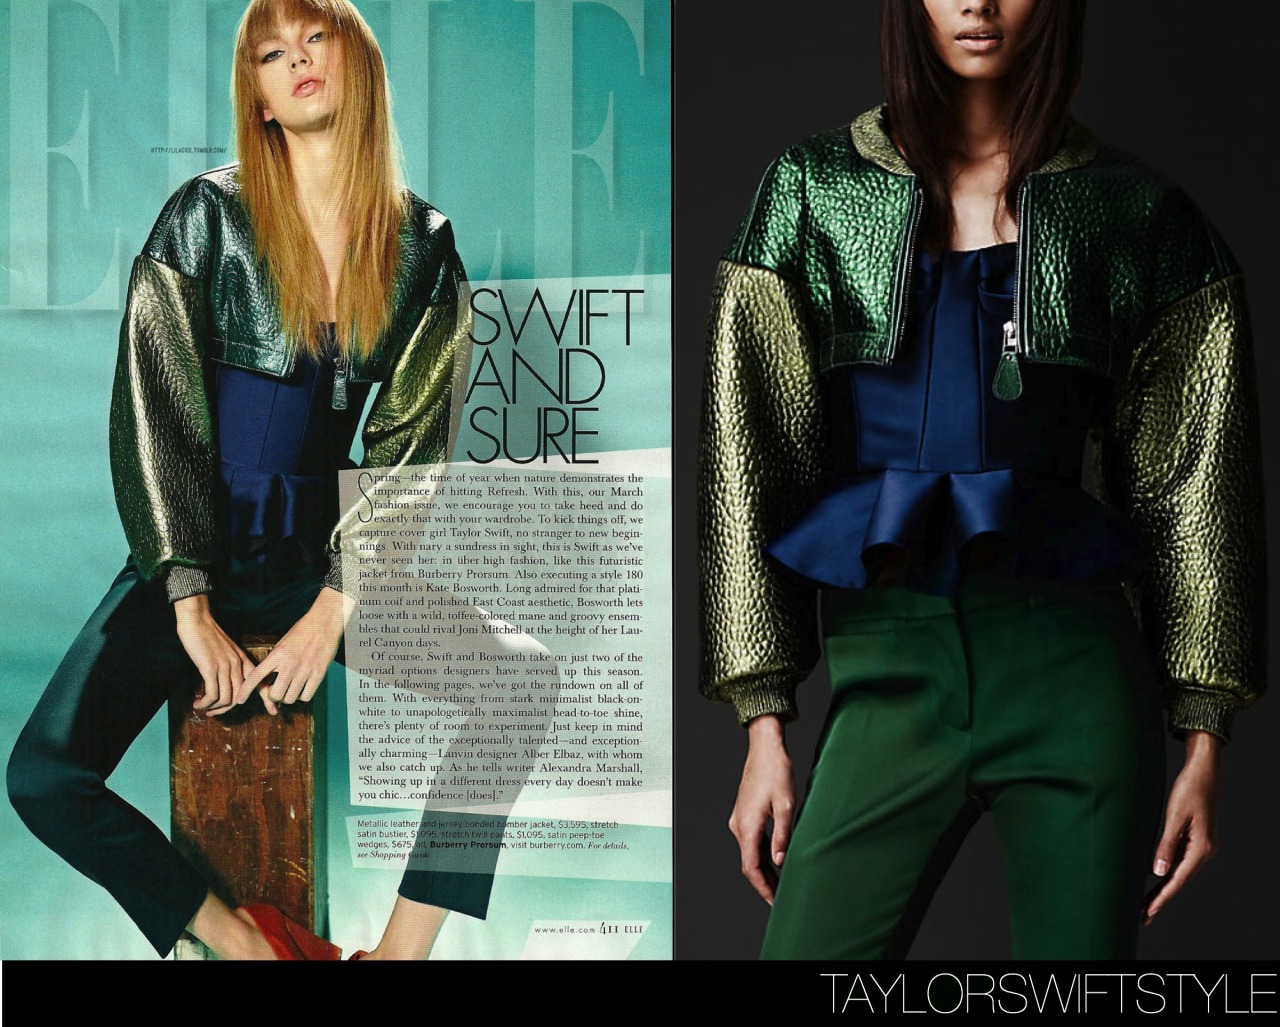 In a photo spread for Elle magazine | March 2013Burberry Prorsum &#8216;Super Cropped Metallic Bomber&#8217; - $3595.00Taylor is every fashion director&#8217;s dream: blonde, cheerful and best of all sample size. In a look pulled directly from the runway, Taylor gets decked out in Burberry Prorsum&#8217;s Spring 2013 RTW collection in this shot from her Elle spread.Worn with: Burberry Prorsum bustier and Burberry Prorsum wedges